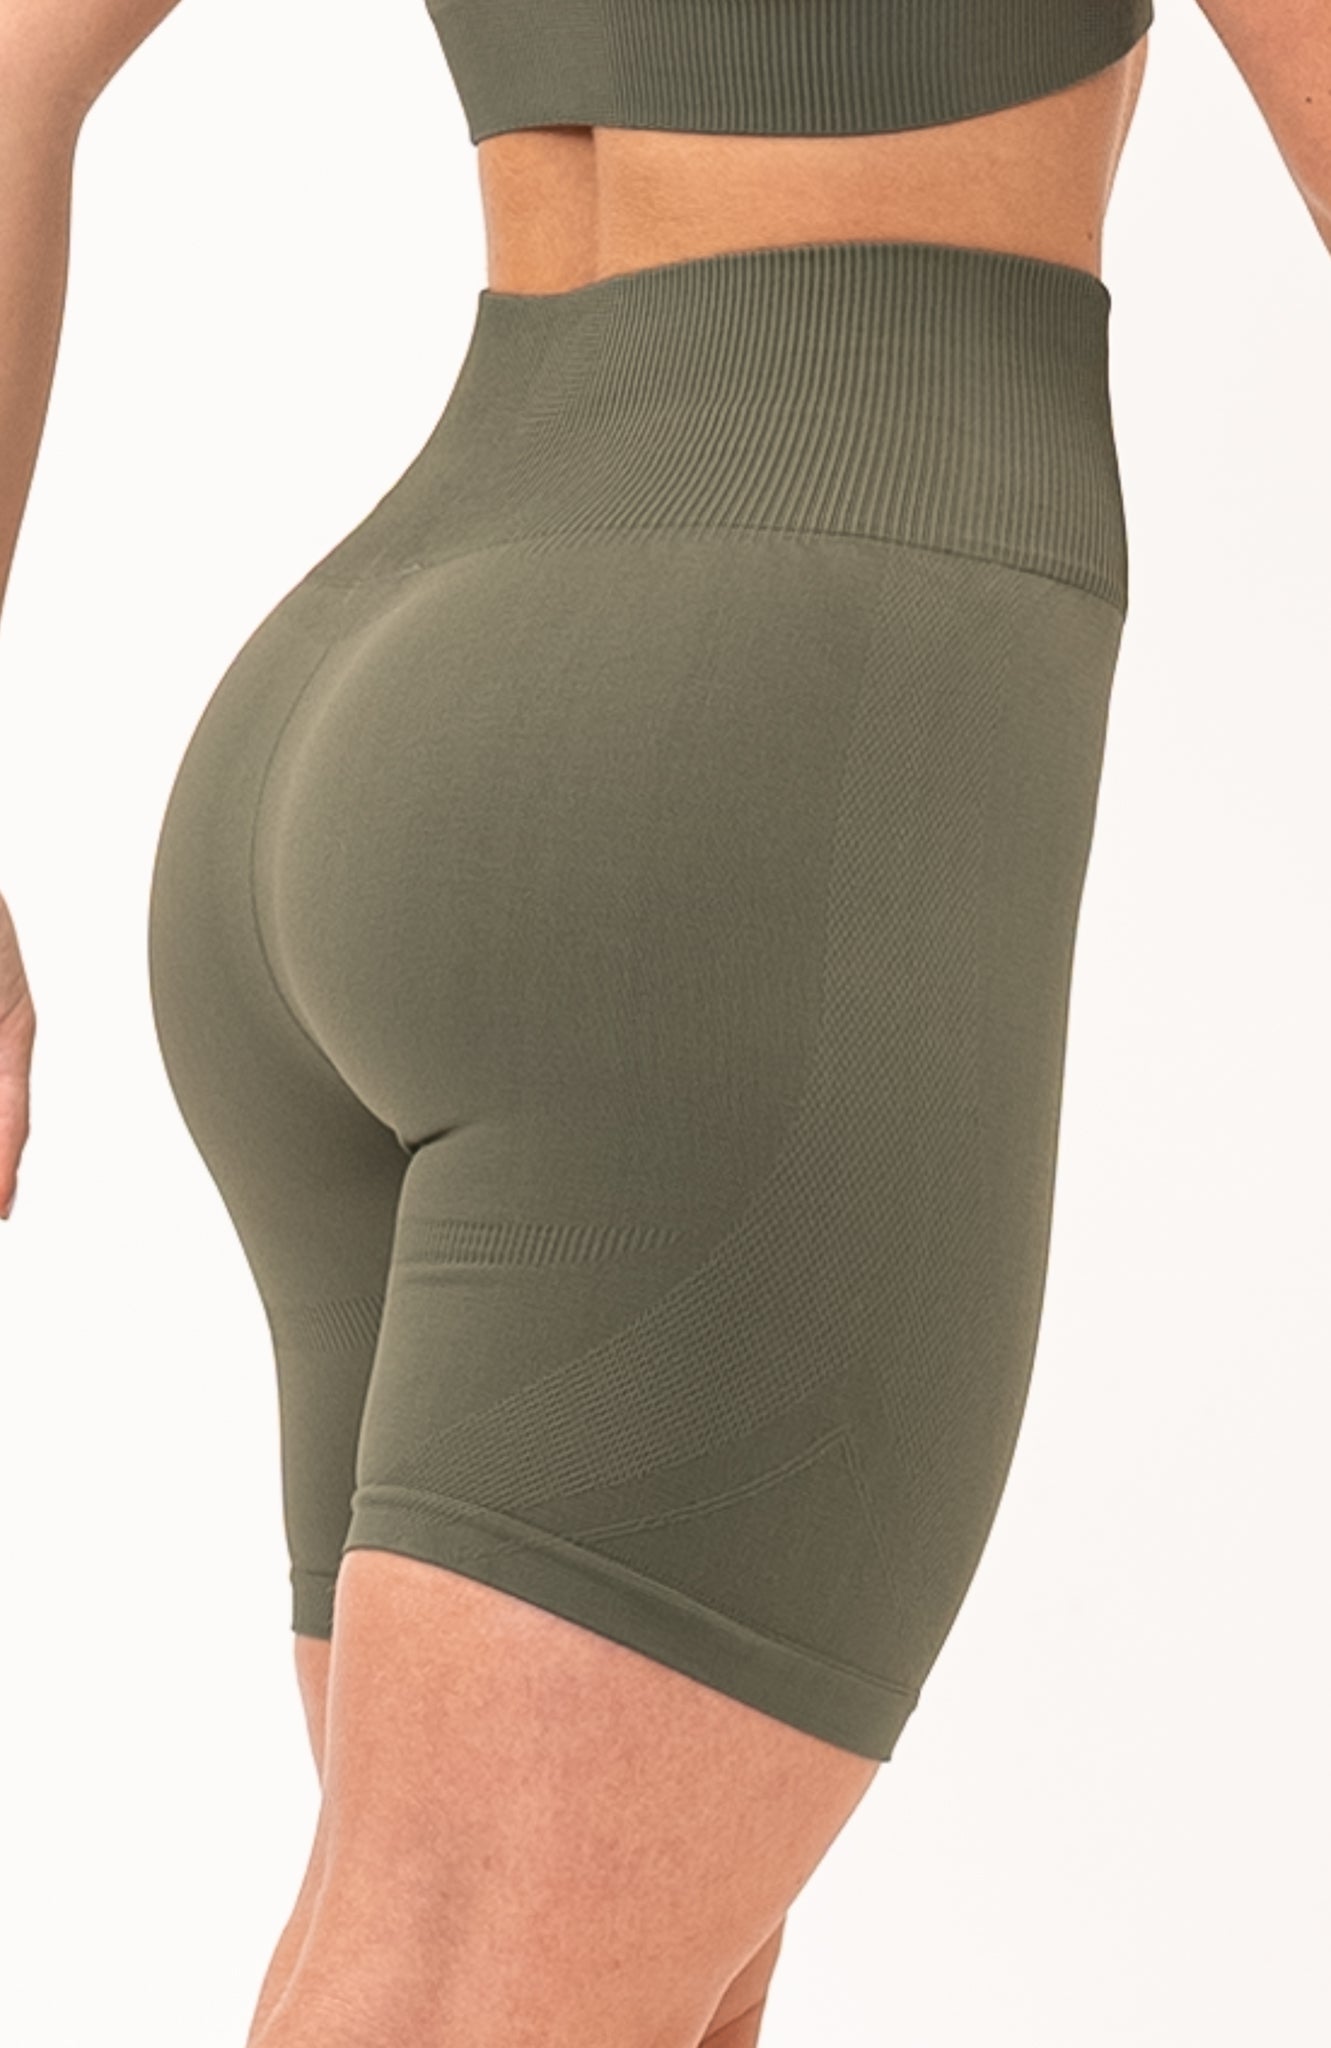 redbaysand Women's seamless Limitless high waisted cycle shorts in olive fade green – Squat proof 5 inch inseam leg bum enhancing shorts for Gym workouts training, Running, yoga, bodybuilding and bikini fitness.